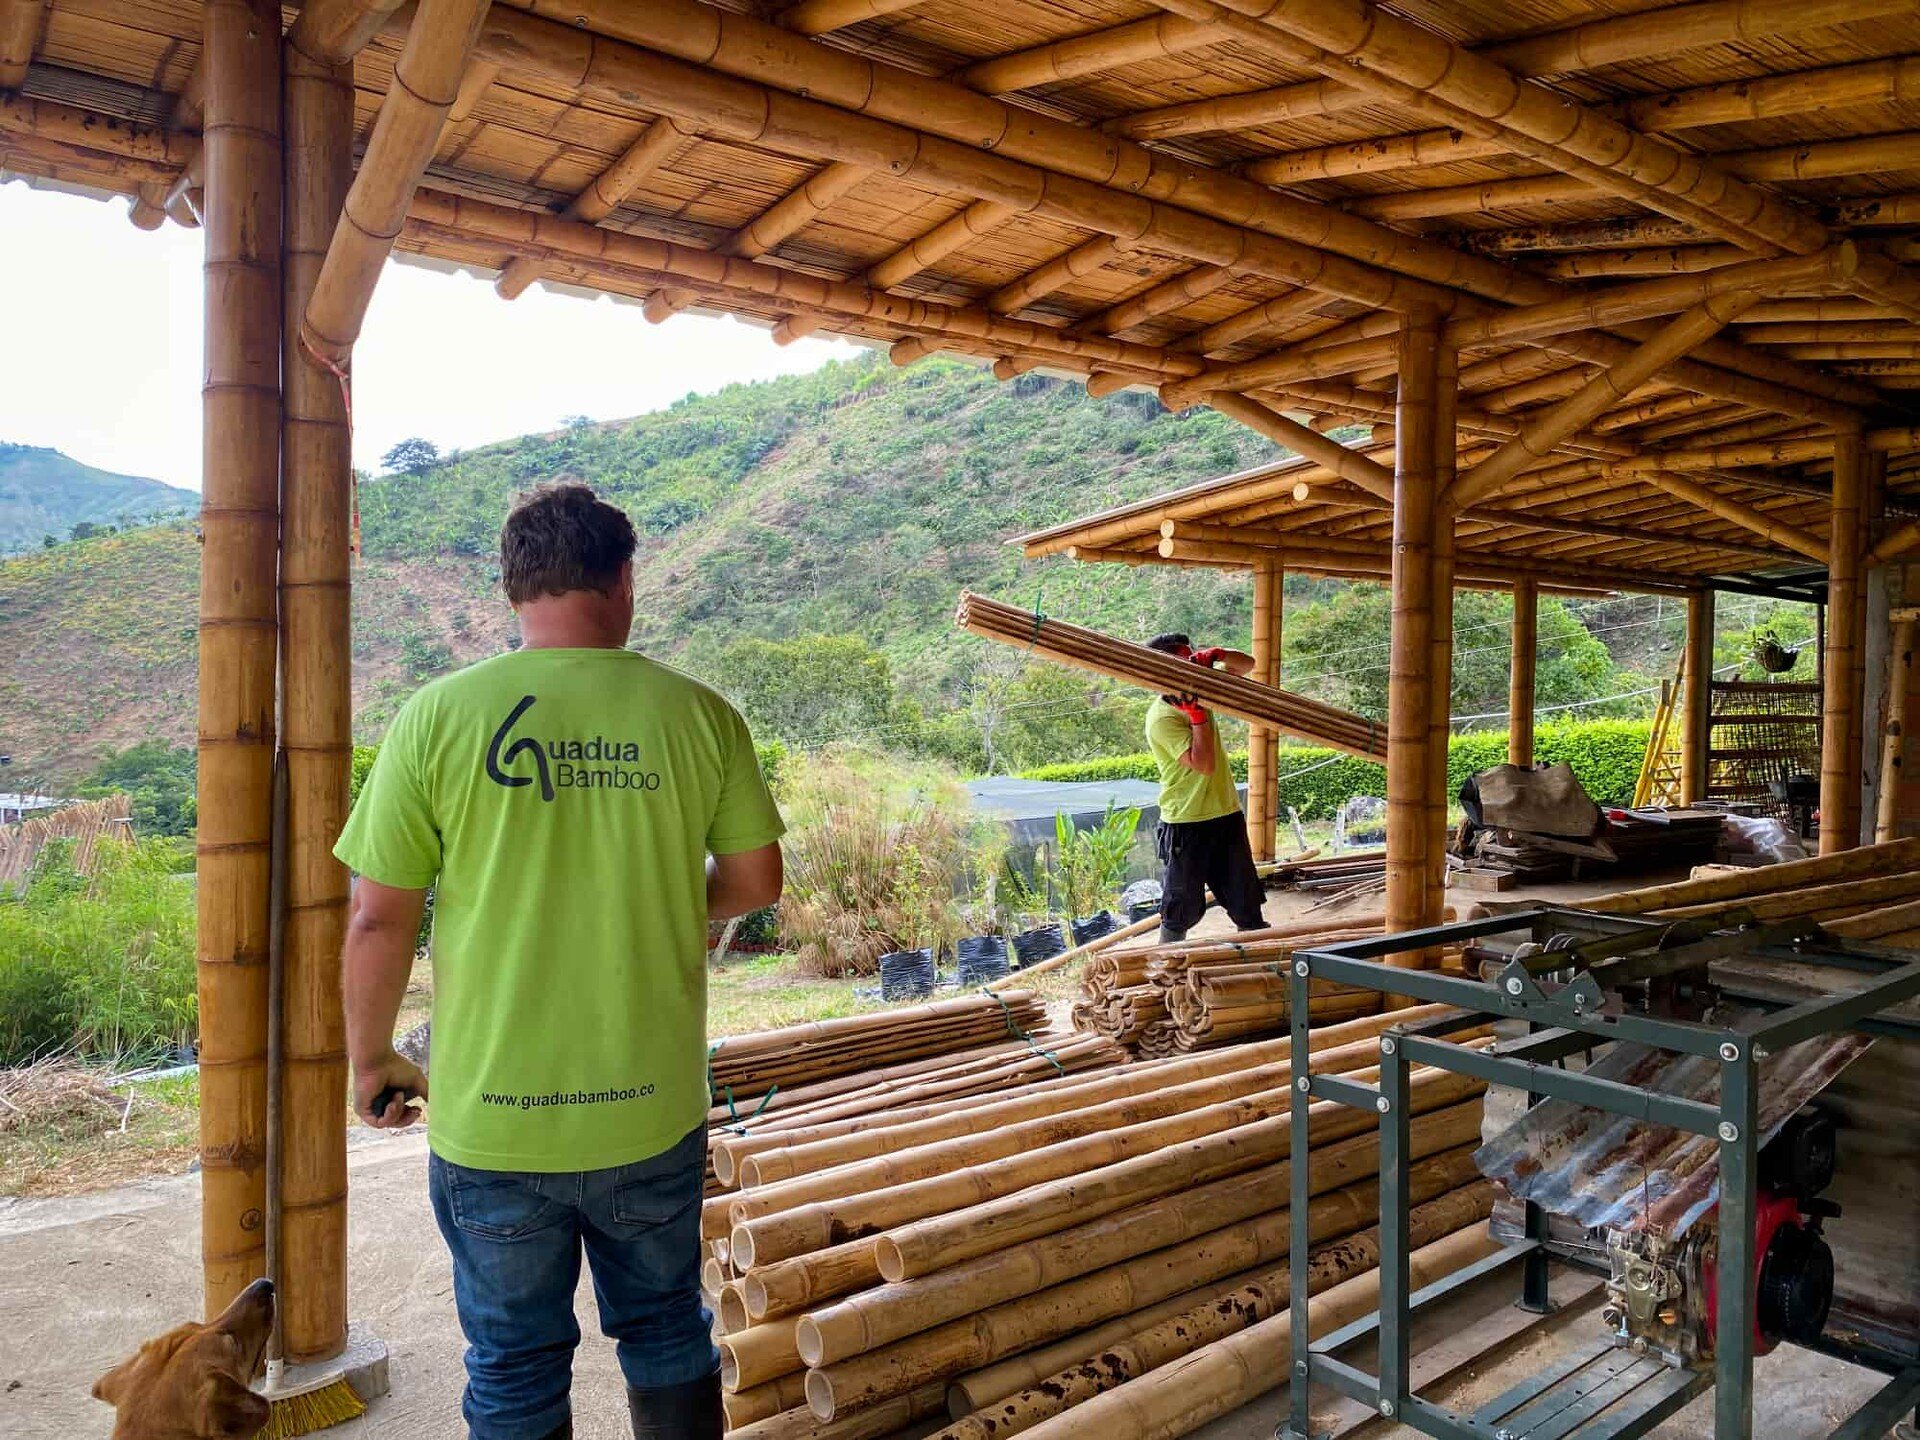 Custom made Guadua Bamboo&reg; Slats for a large project in Medellin, Colombia.
https://www.guaduabamboo.com/bamboo-slats